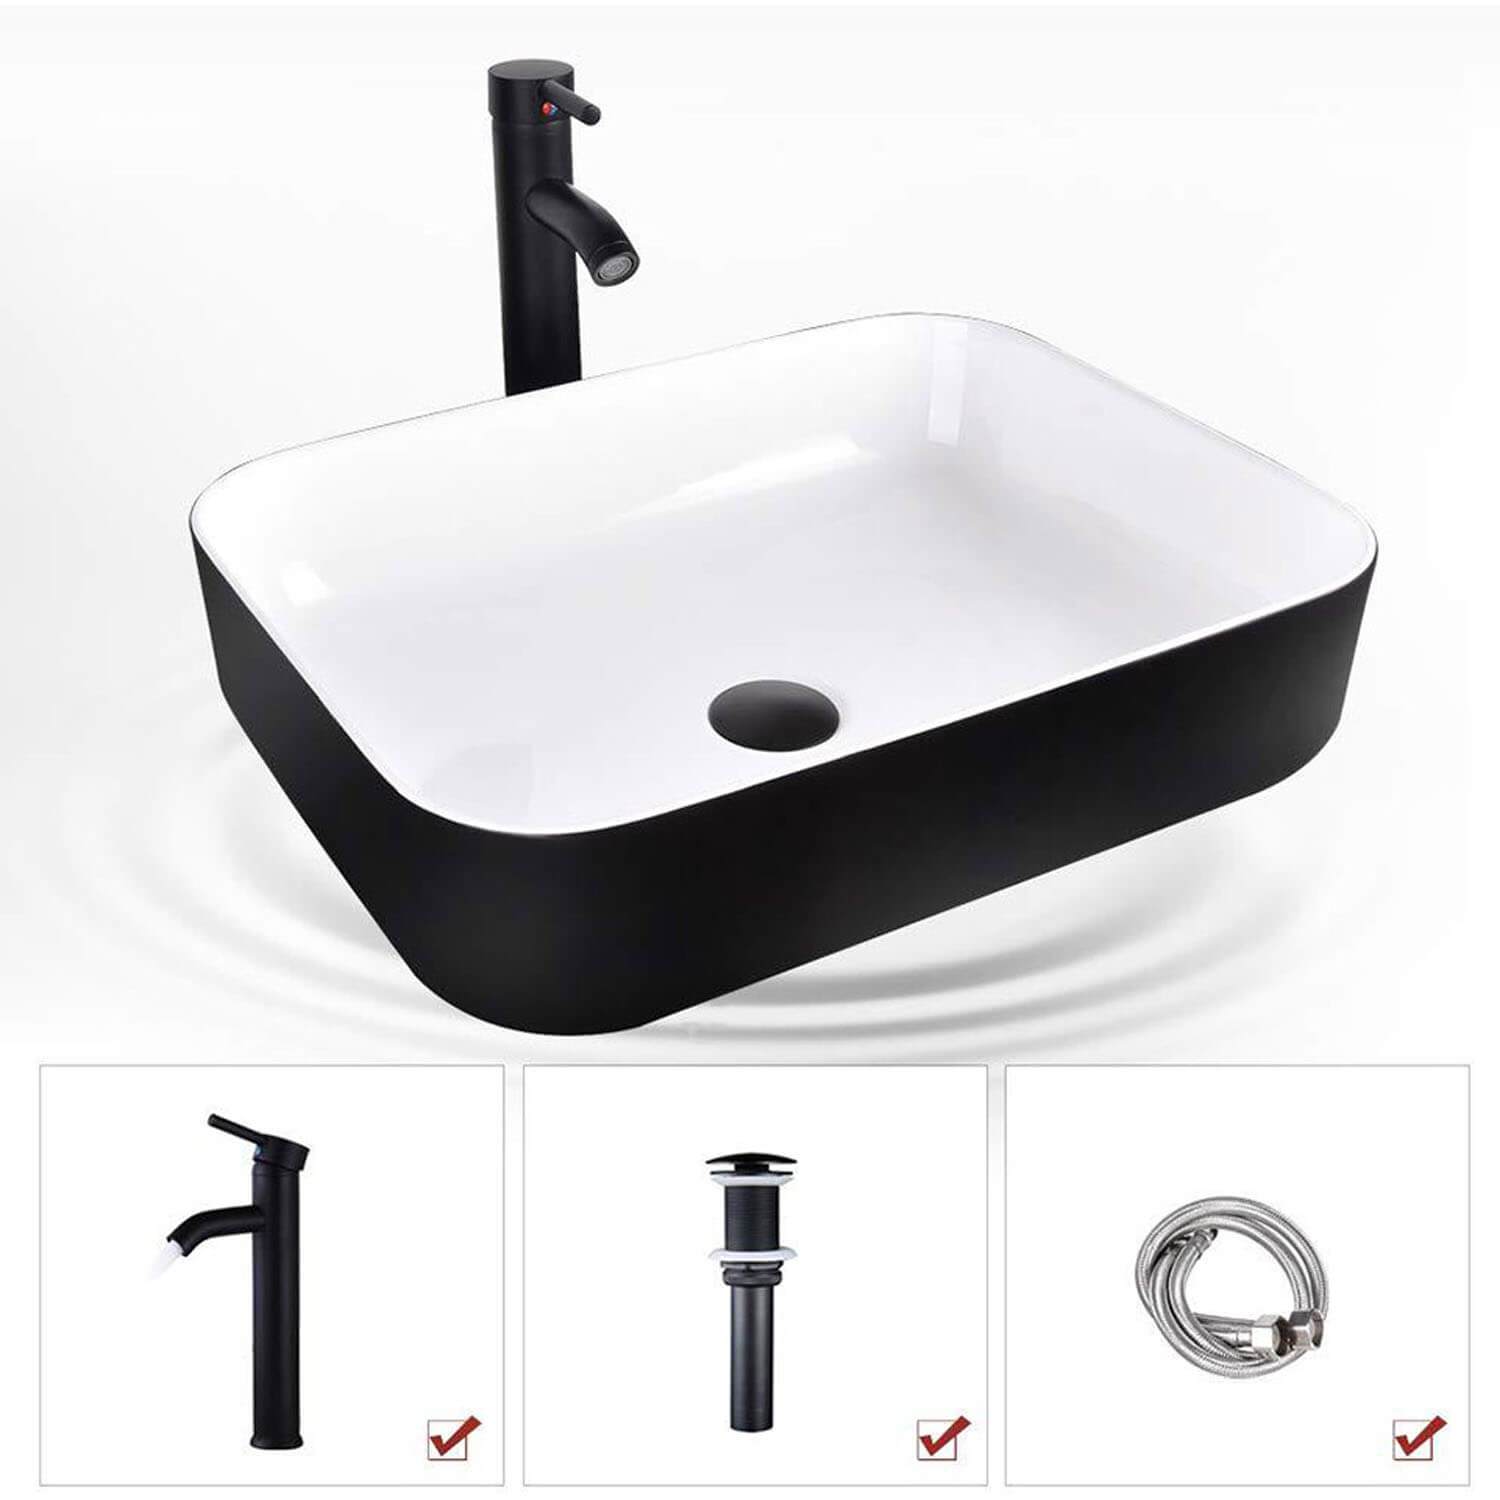 Ceramic Vessel Sink And Faucet Combo（Black Side Edge）detail image